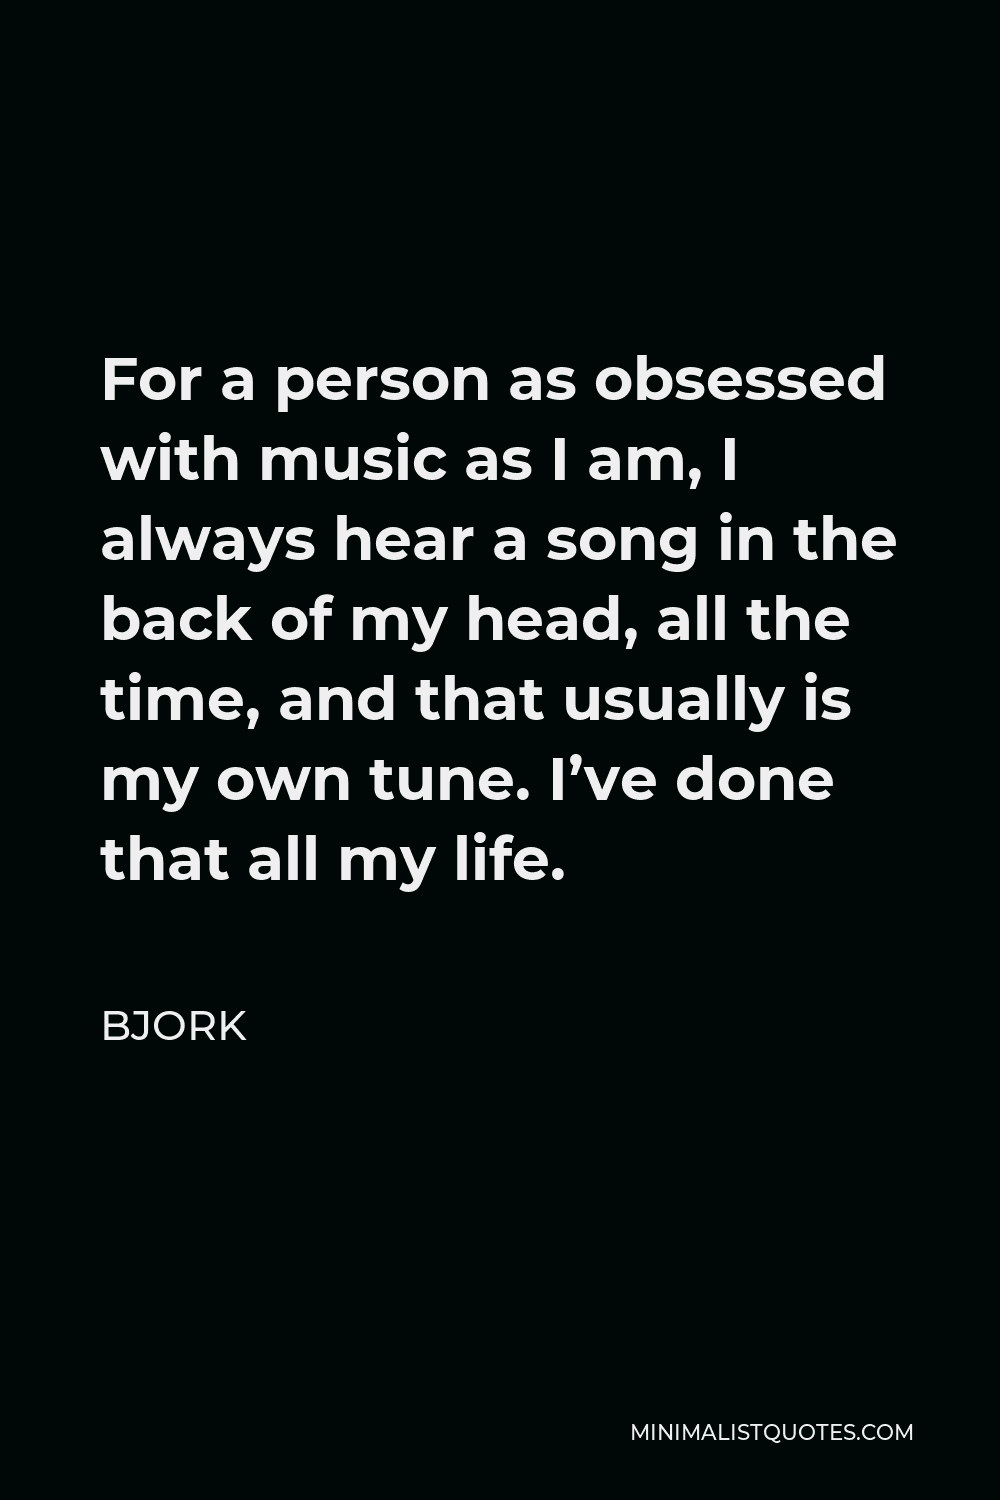 Bjork Quote - For a person as obsessed with music as I am, I always hear a song in the back of my head, all the time, and that usually is my own tune. I’ve done that all my life.